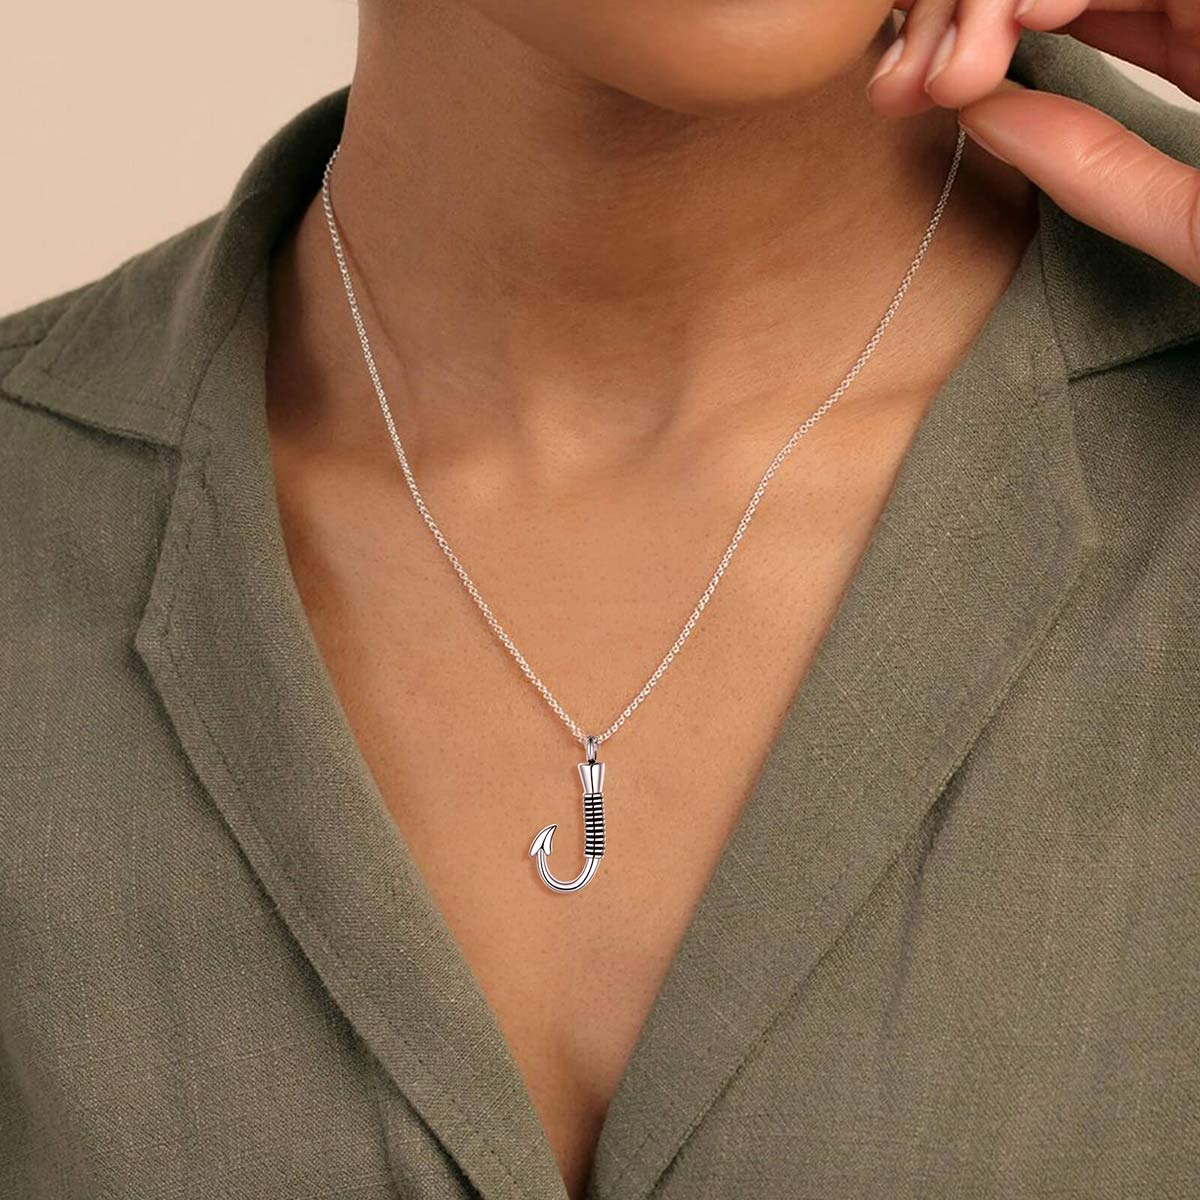 Fish Wire Necklace – Fit Super-Humain